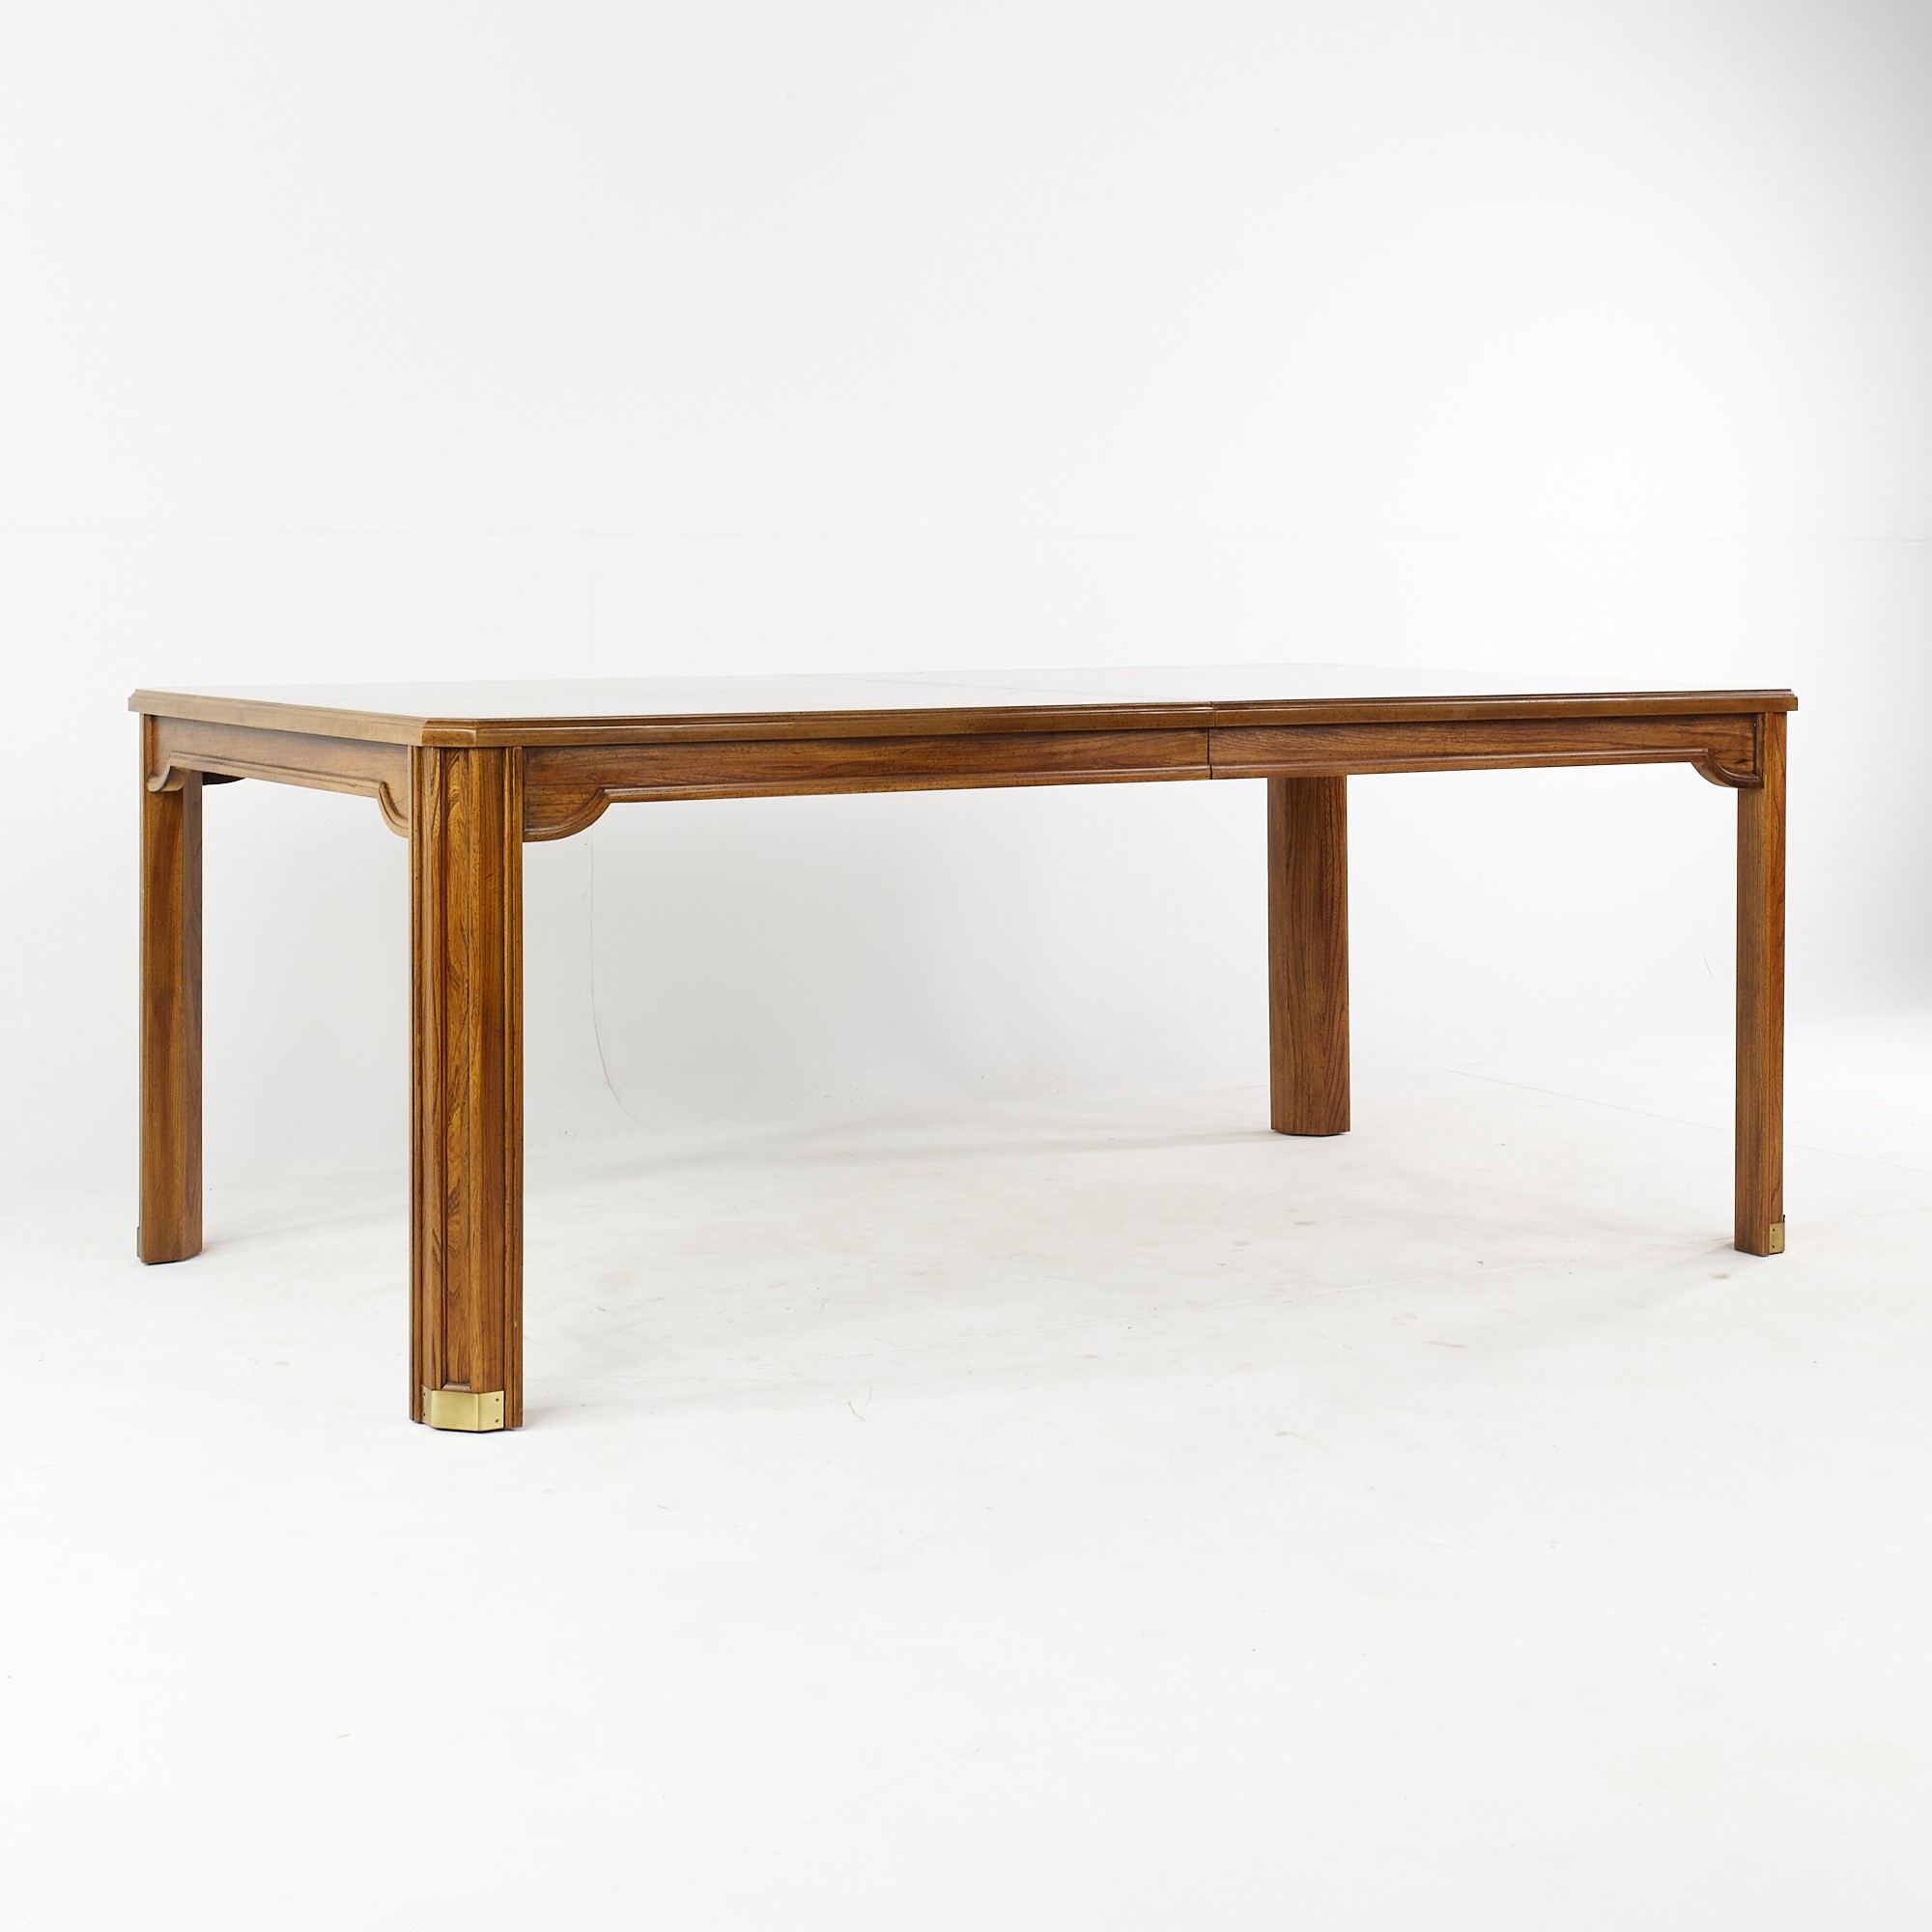 Hickory Manufacturing Company Mid Century Expanding Burlwood Inlaid Dining Table with 2 Leaves